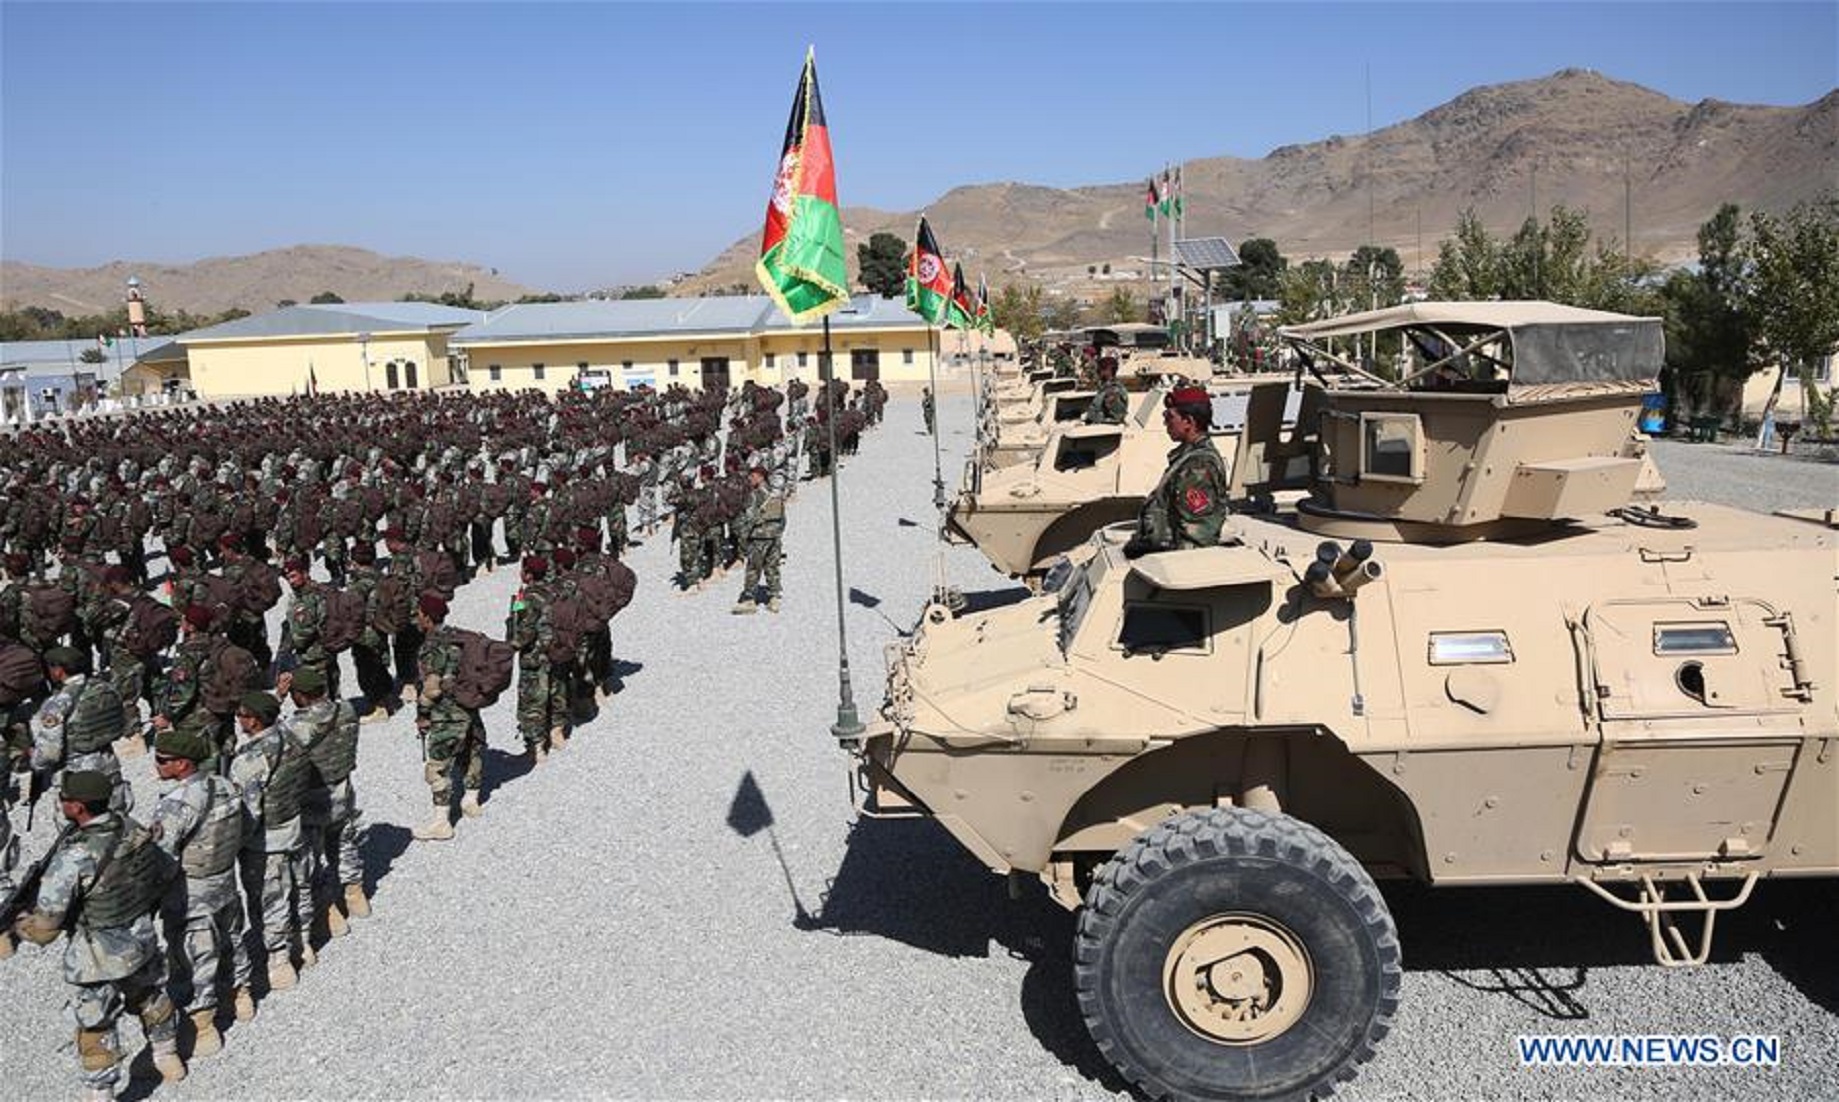 1,200 Youth Commissioned To Afghan National Army